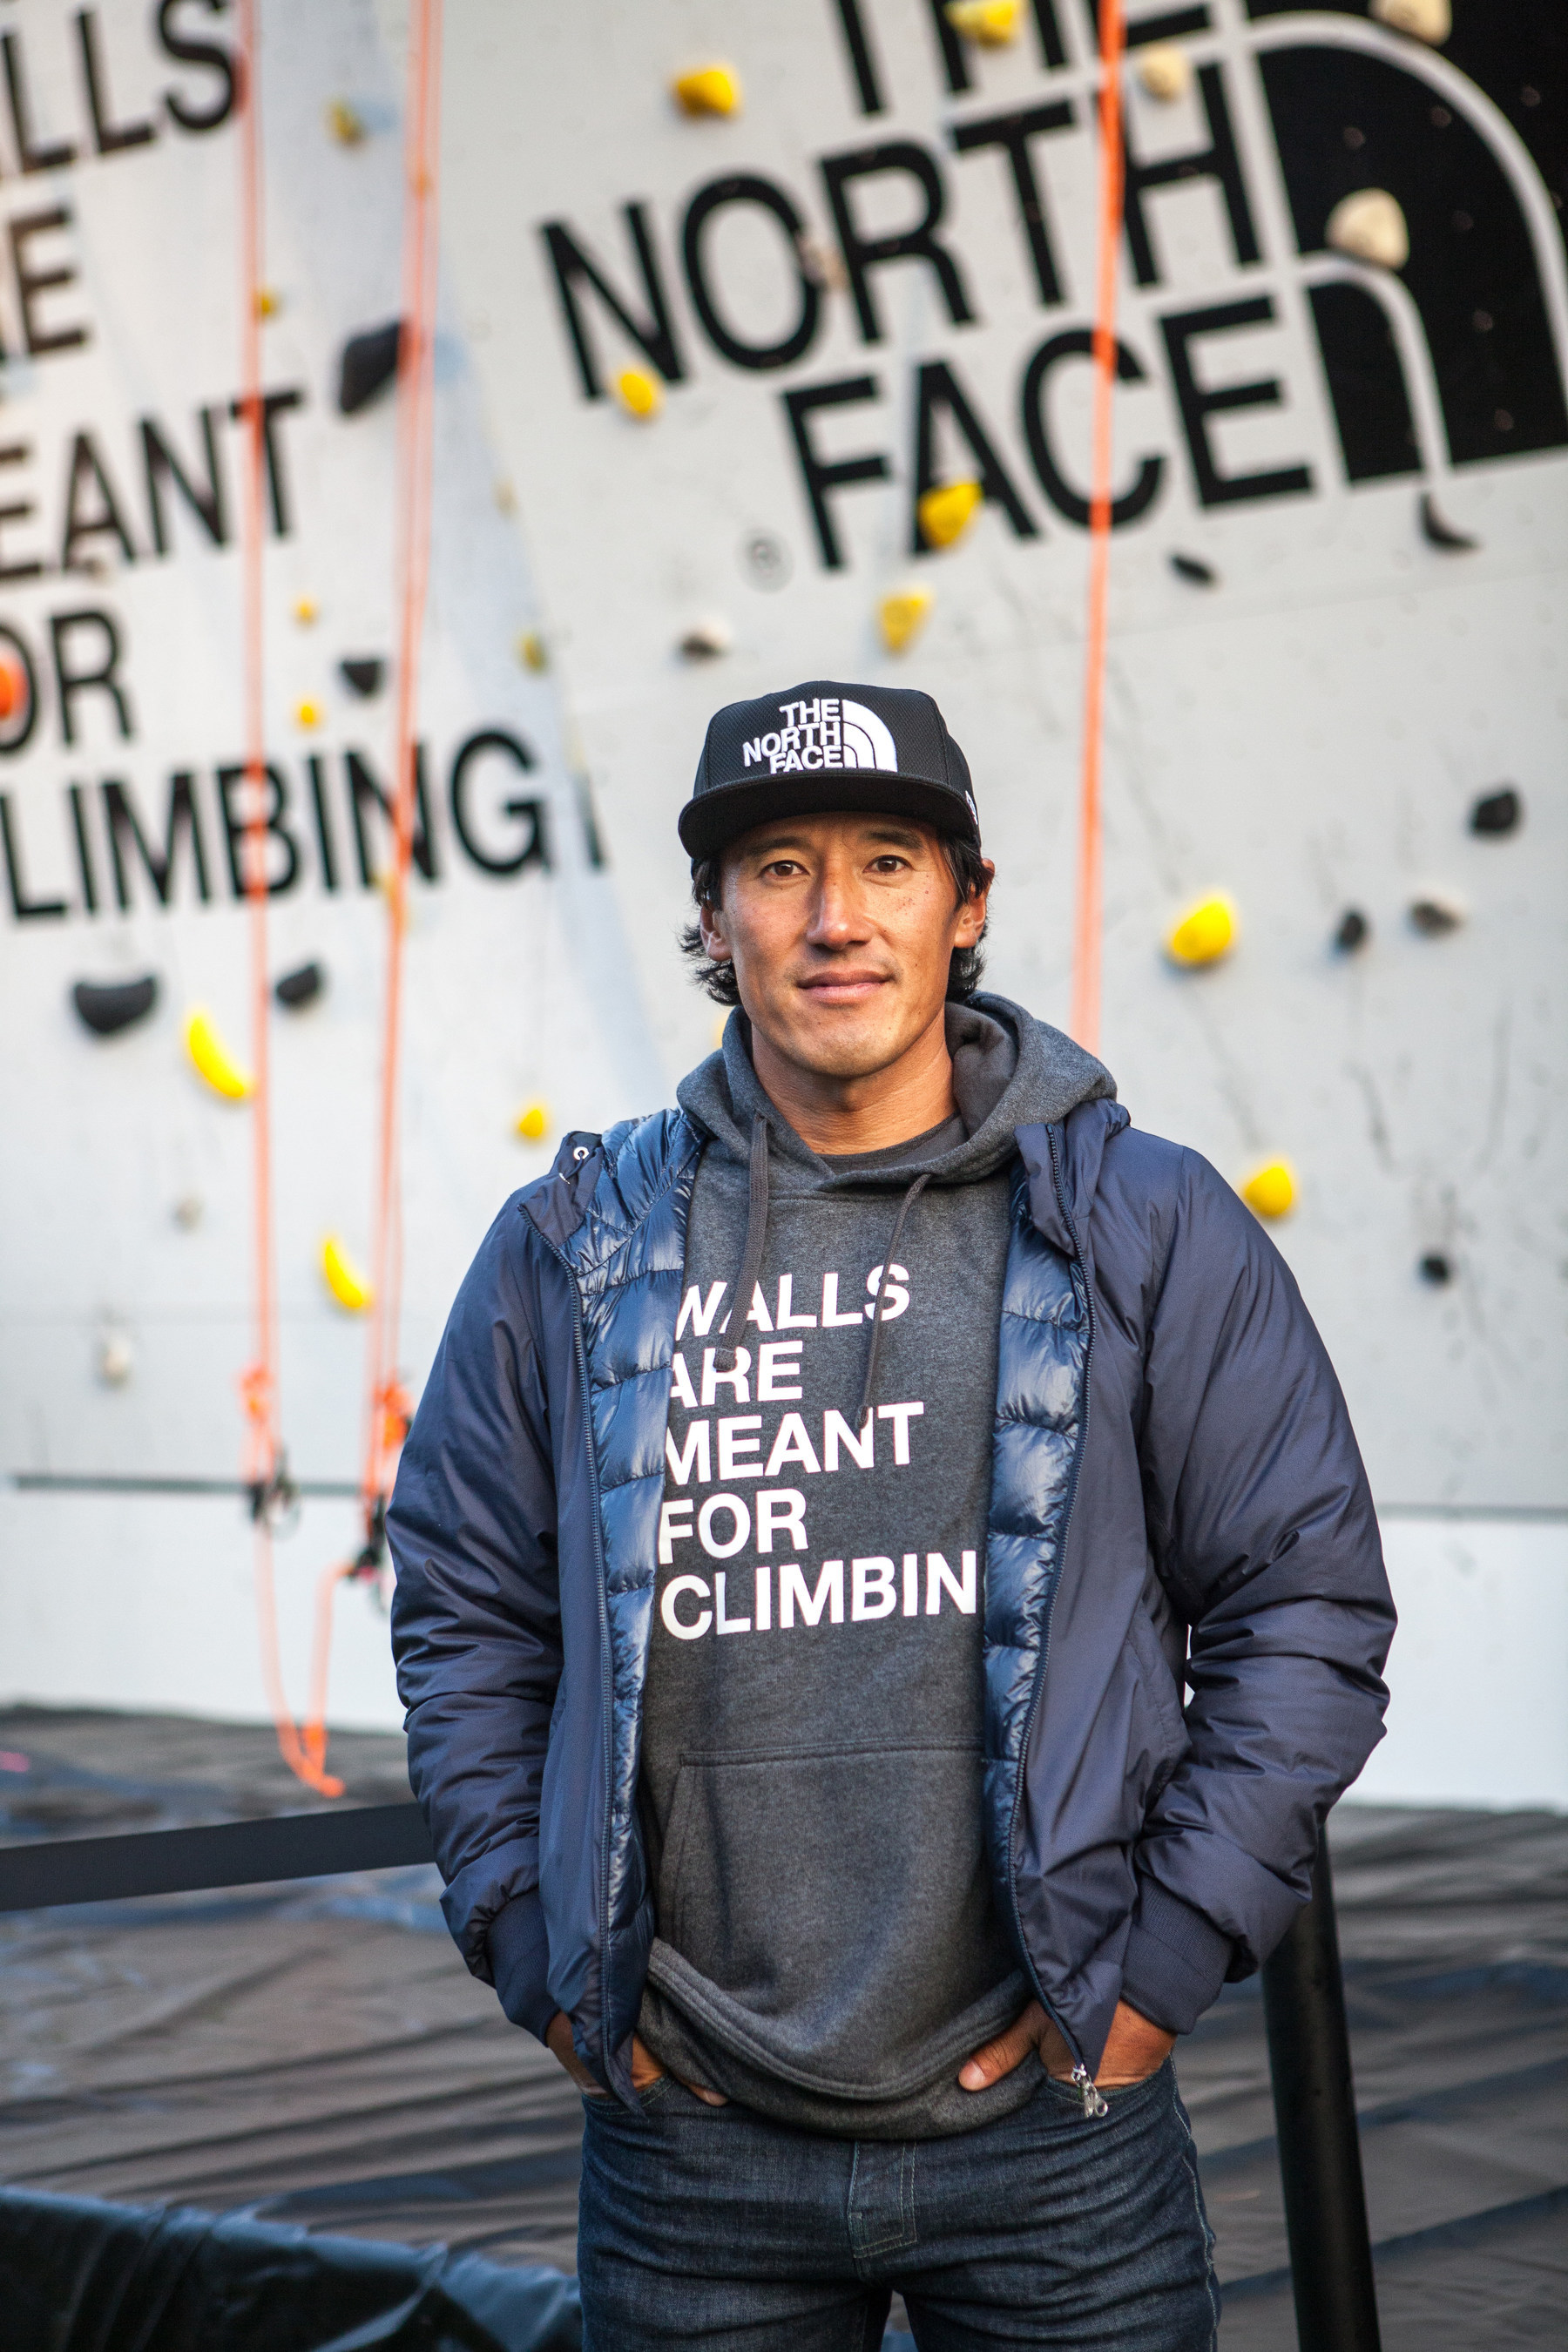 The North Face Celebrates Community with Global “Walls Are Meant For